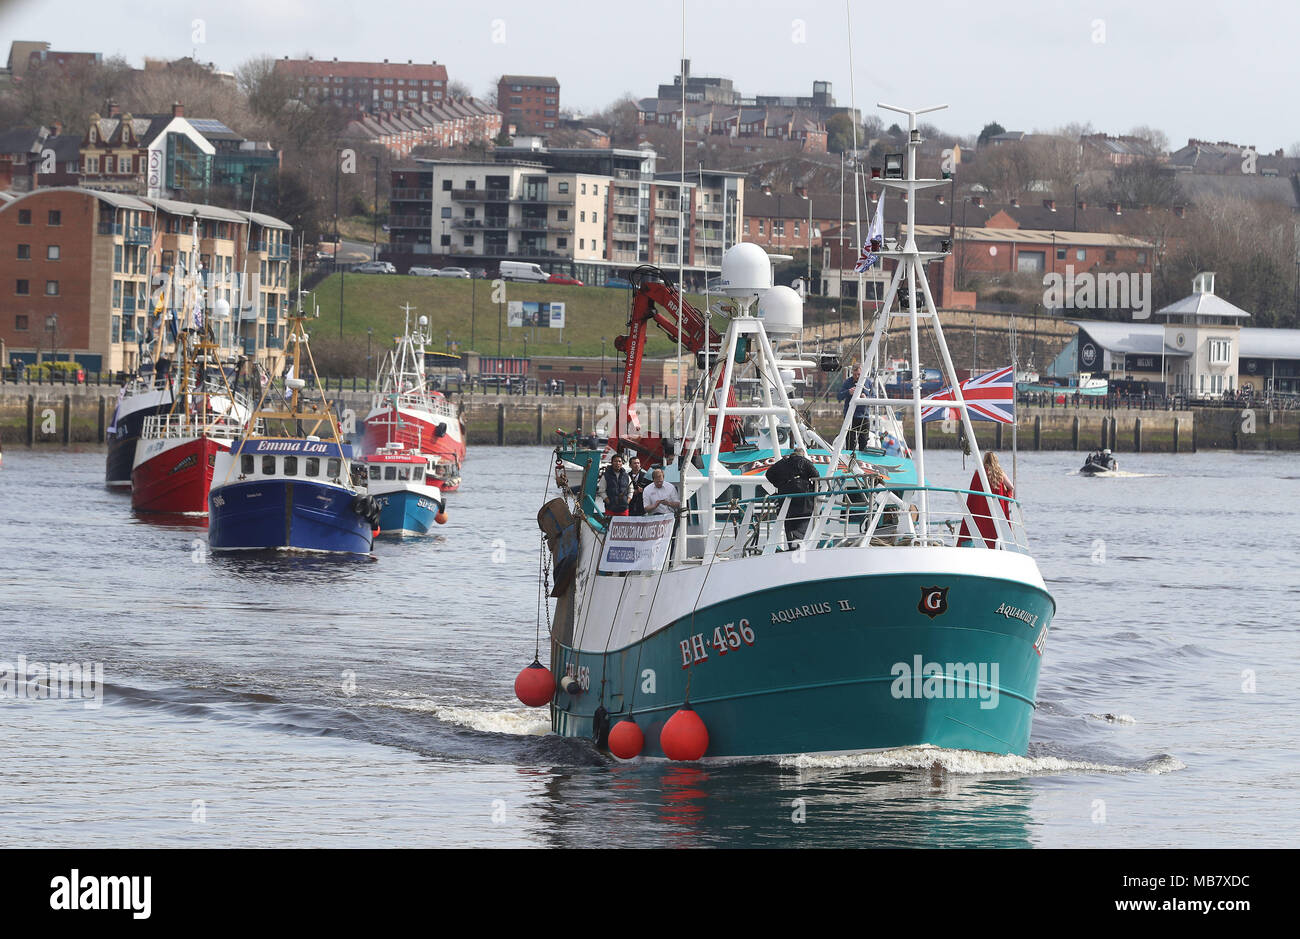 A flotilla of fishing boats by the Gateshead Millennium Bridge in Newcastle, in a protest, organised by Campaign for an Independent Britain and Fishing for Leave, against the deal that will see the UK obeying the EU Common Fisheries Policy for the transition period of Brexit. Stock Photo